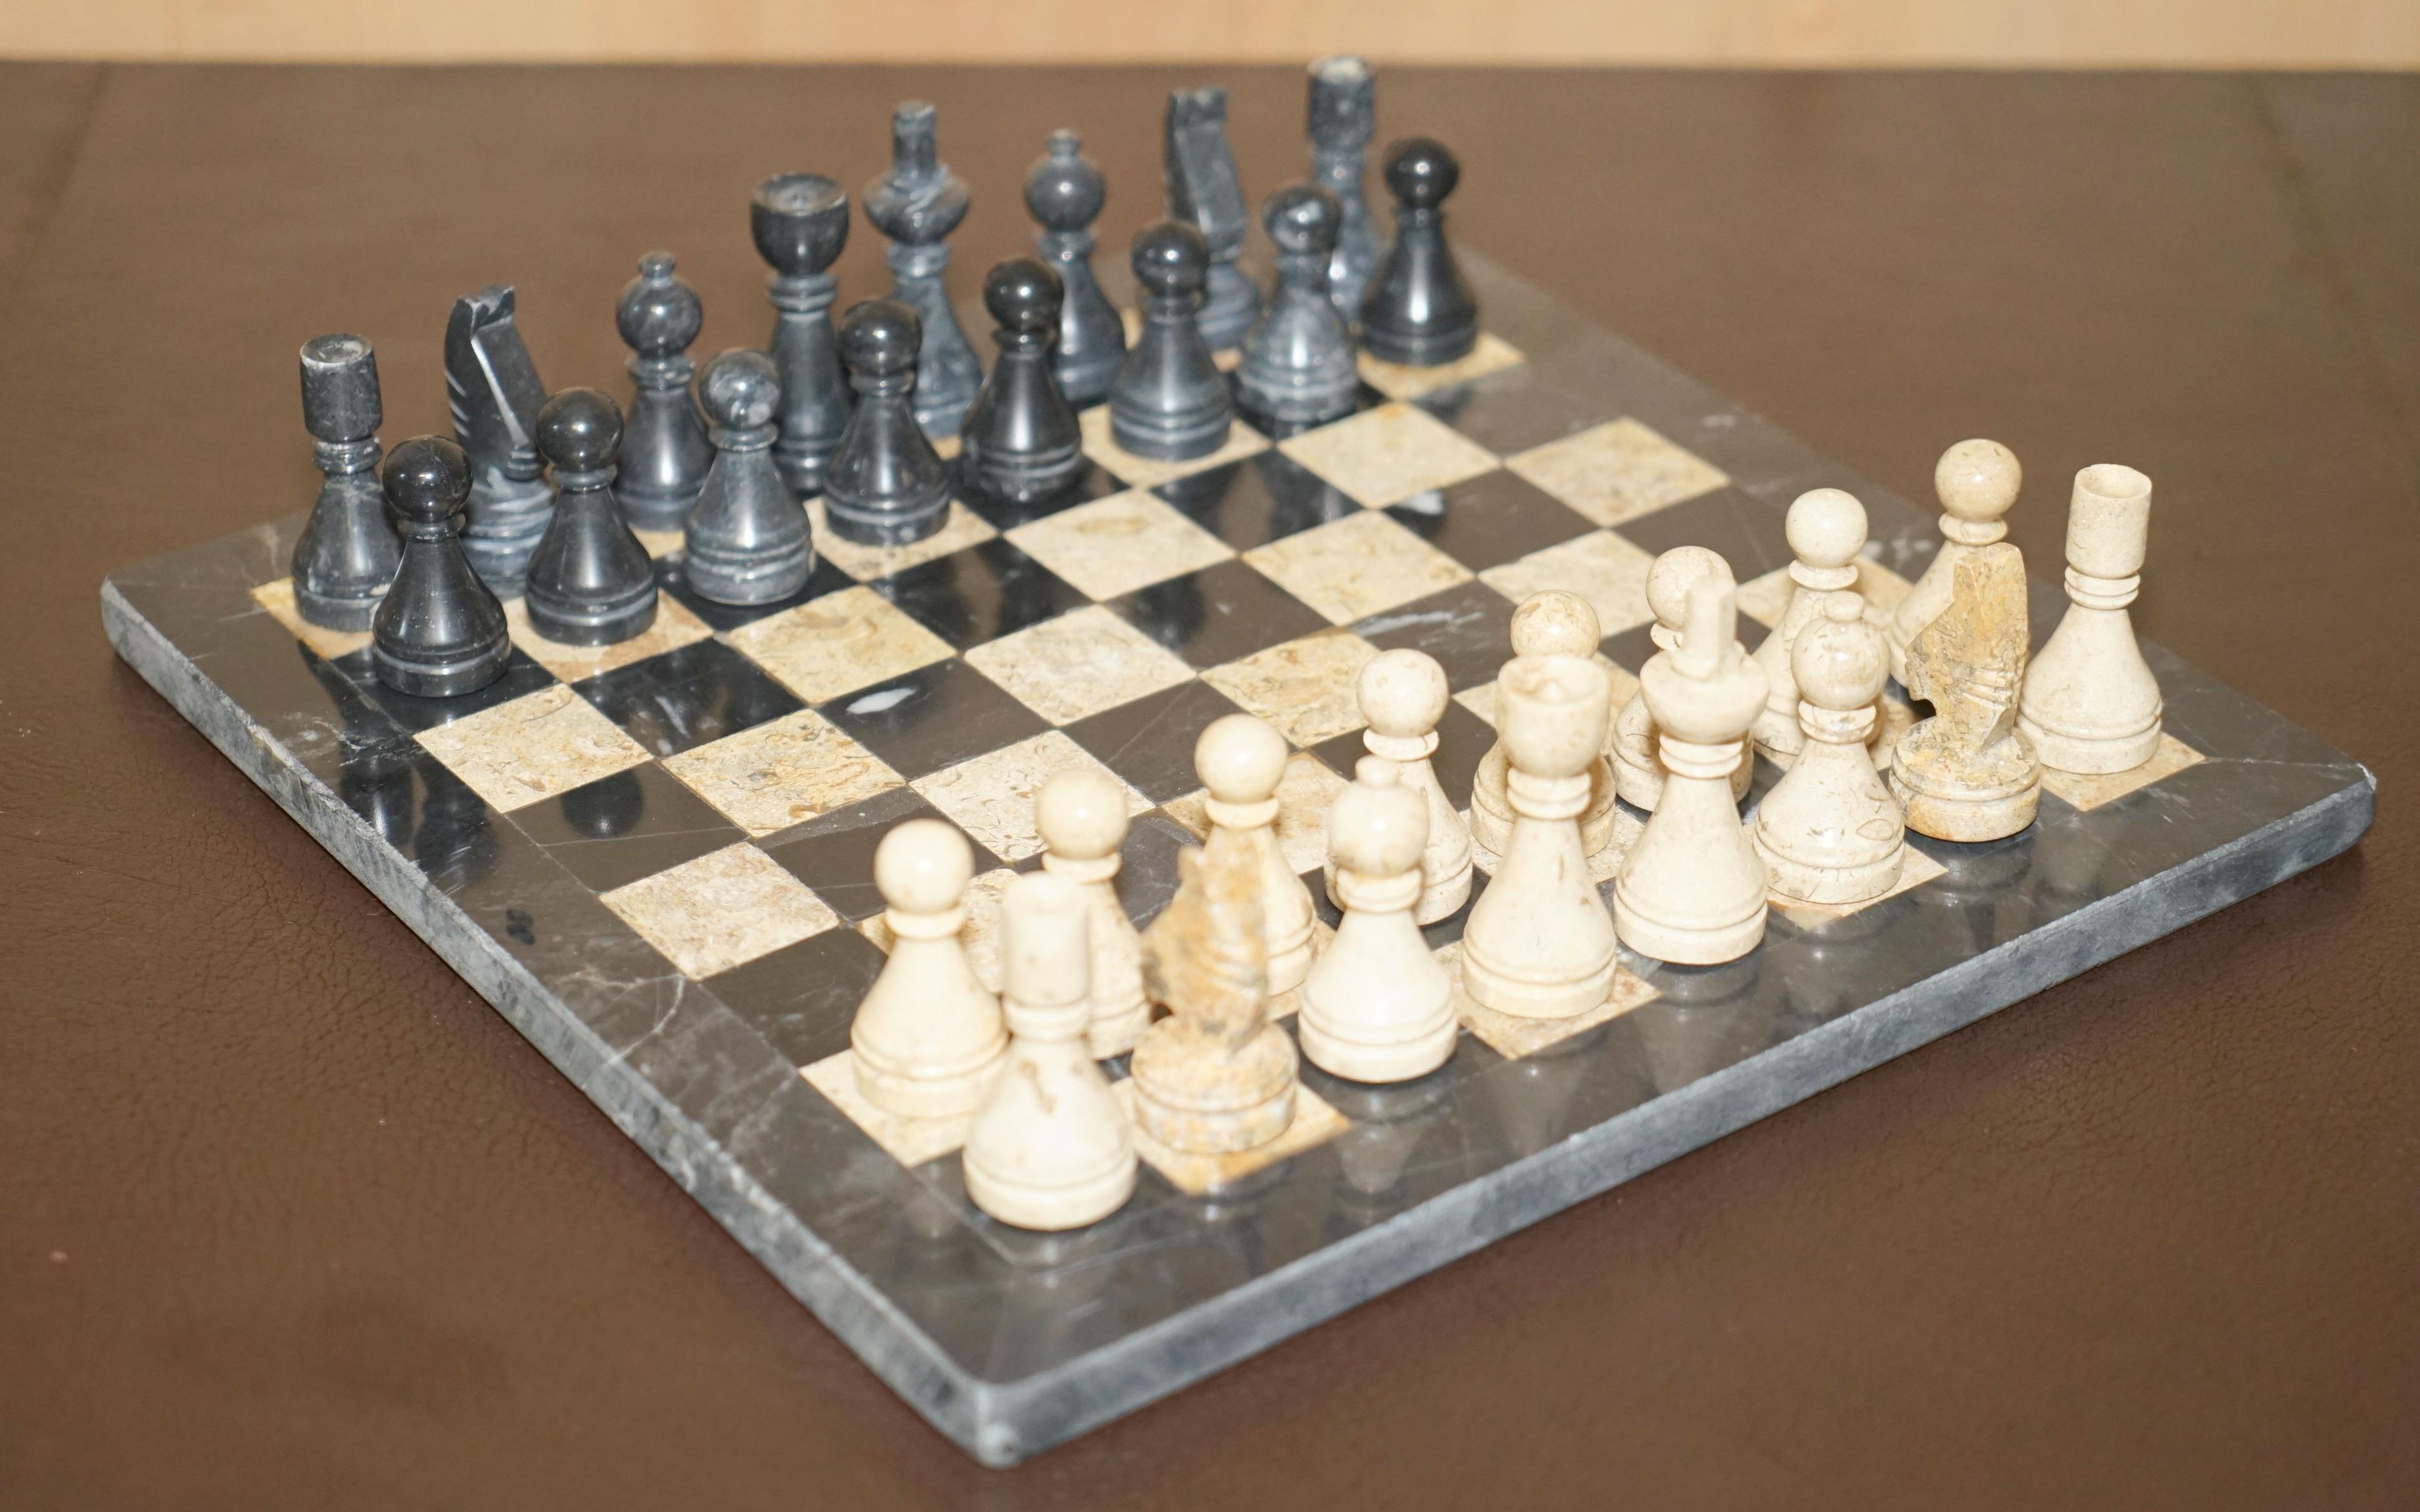 We are delighted to offer for sale this stunning antique solid Italian marble chessboard & pieces set

A truly stunning and highly collectable suite, they look fantastic in any setting and play very nicely 

The condition is fantastic for the